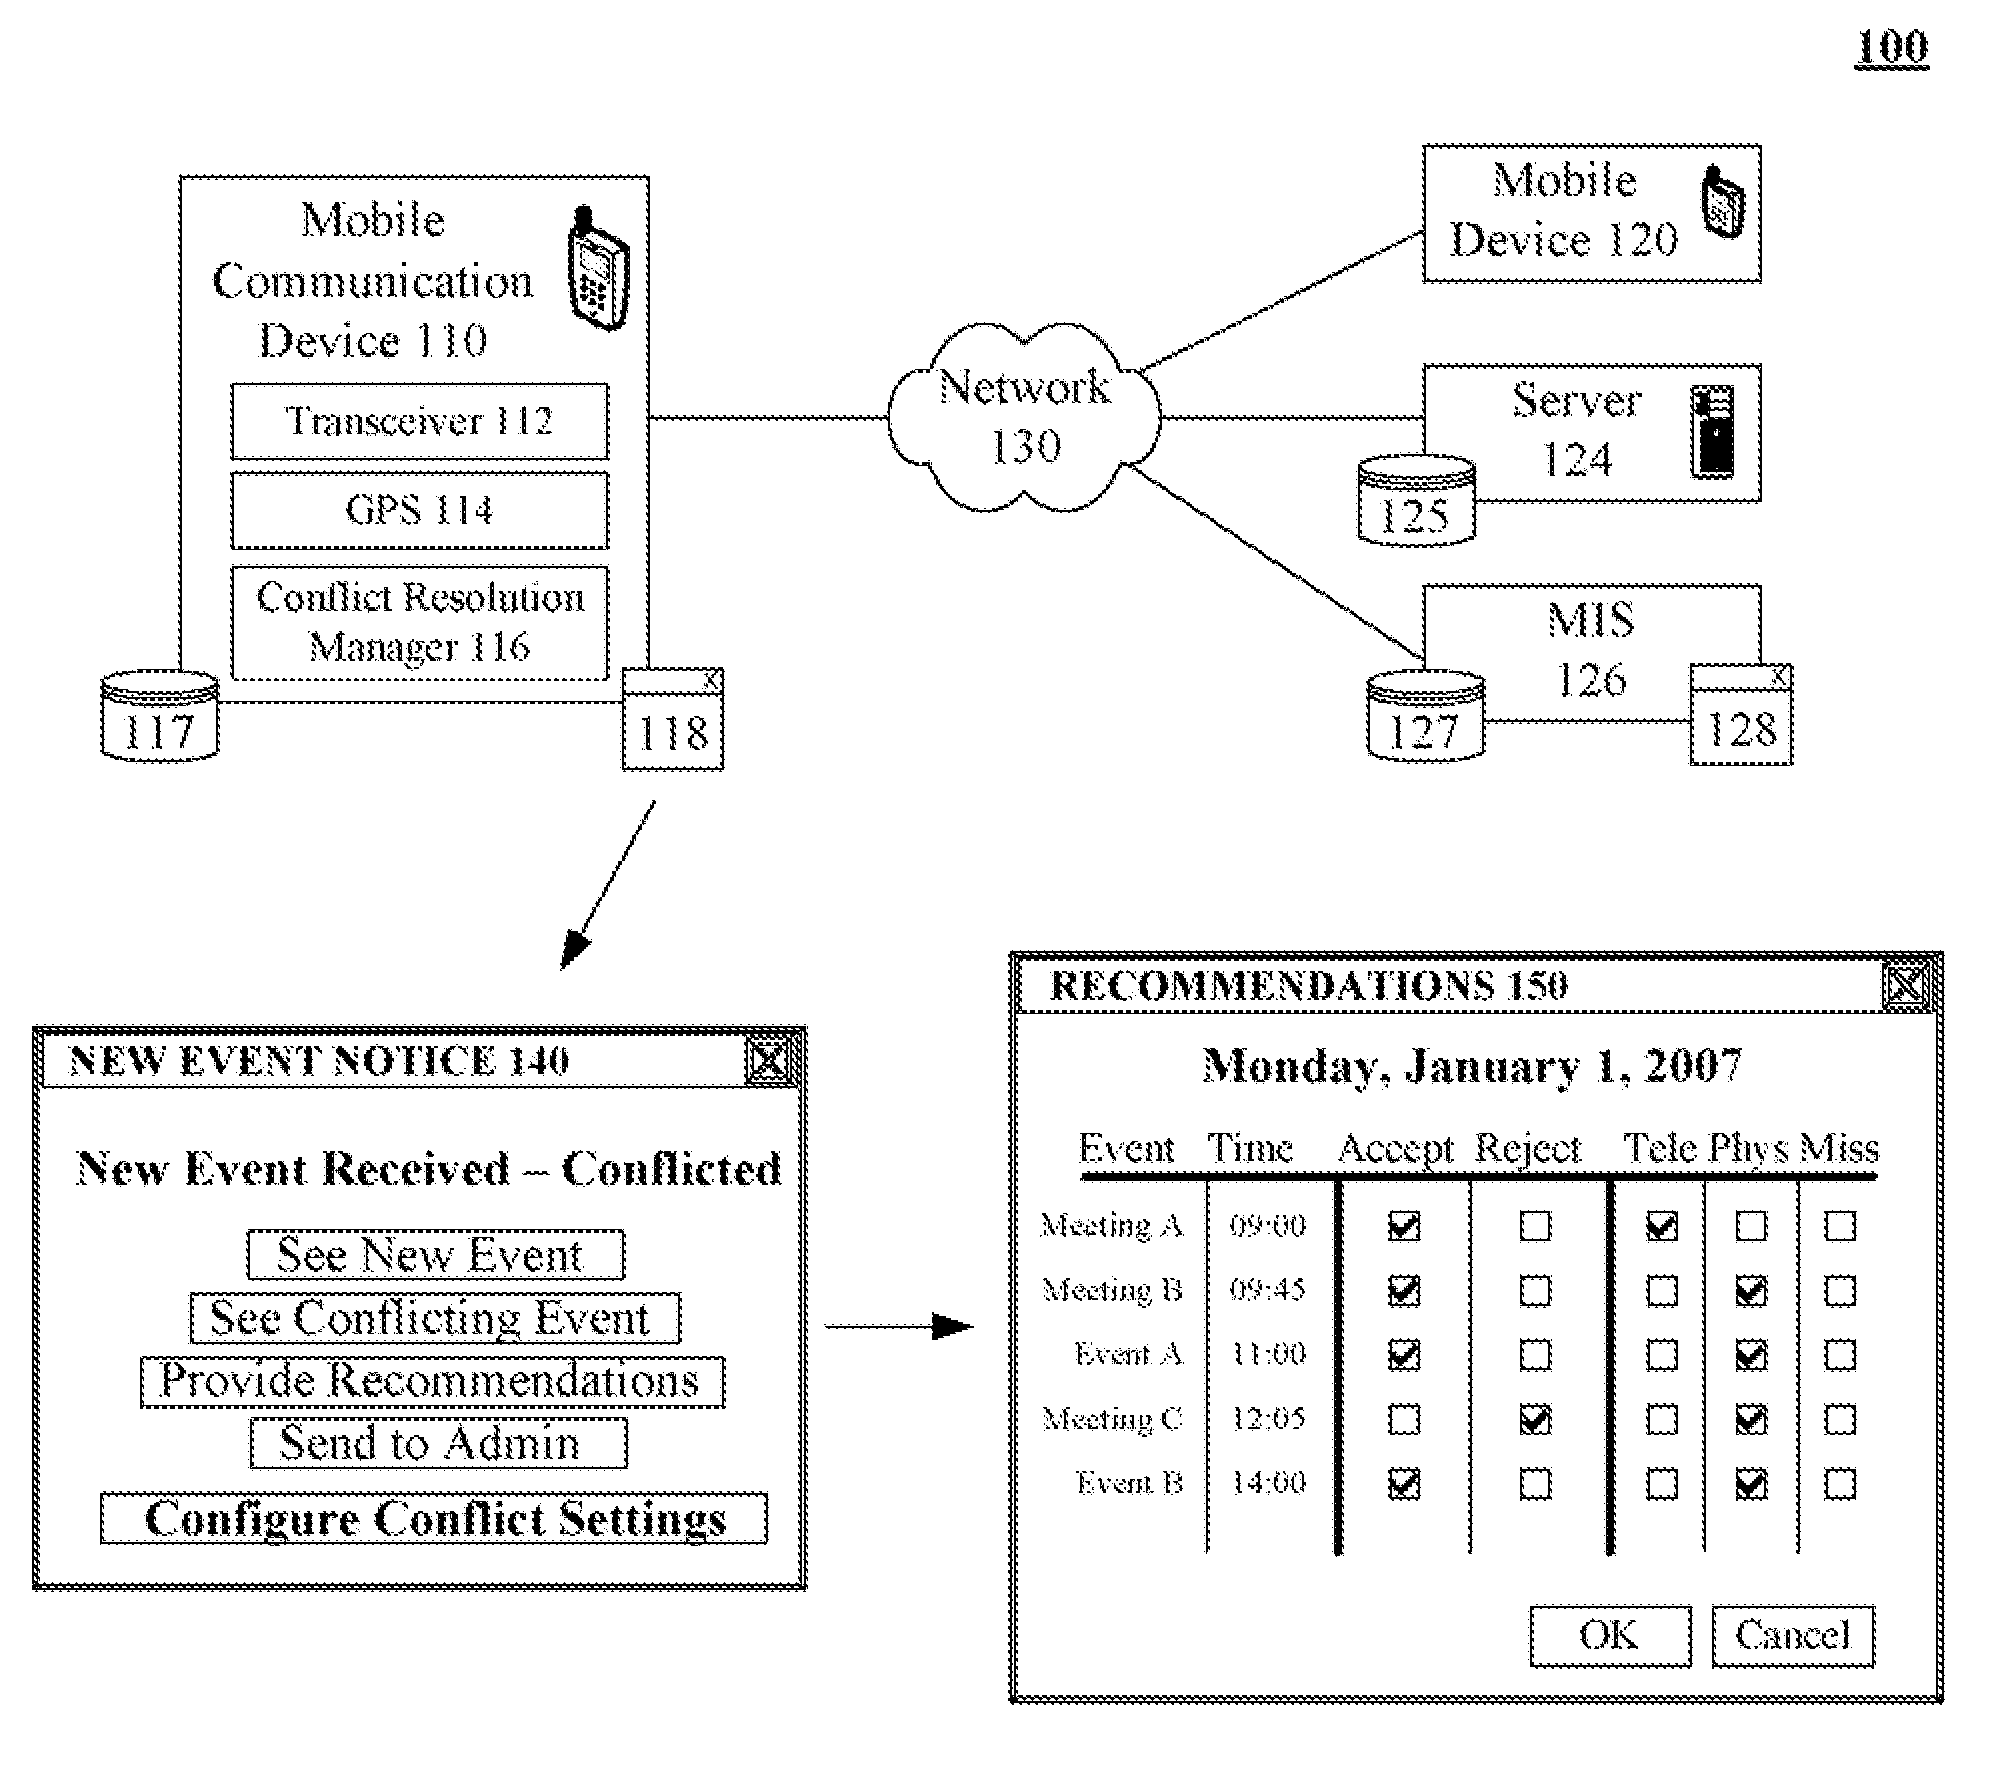 Conflict resolution mechanism for managing calendar events with a mobile communication device